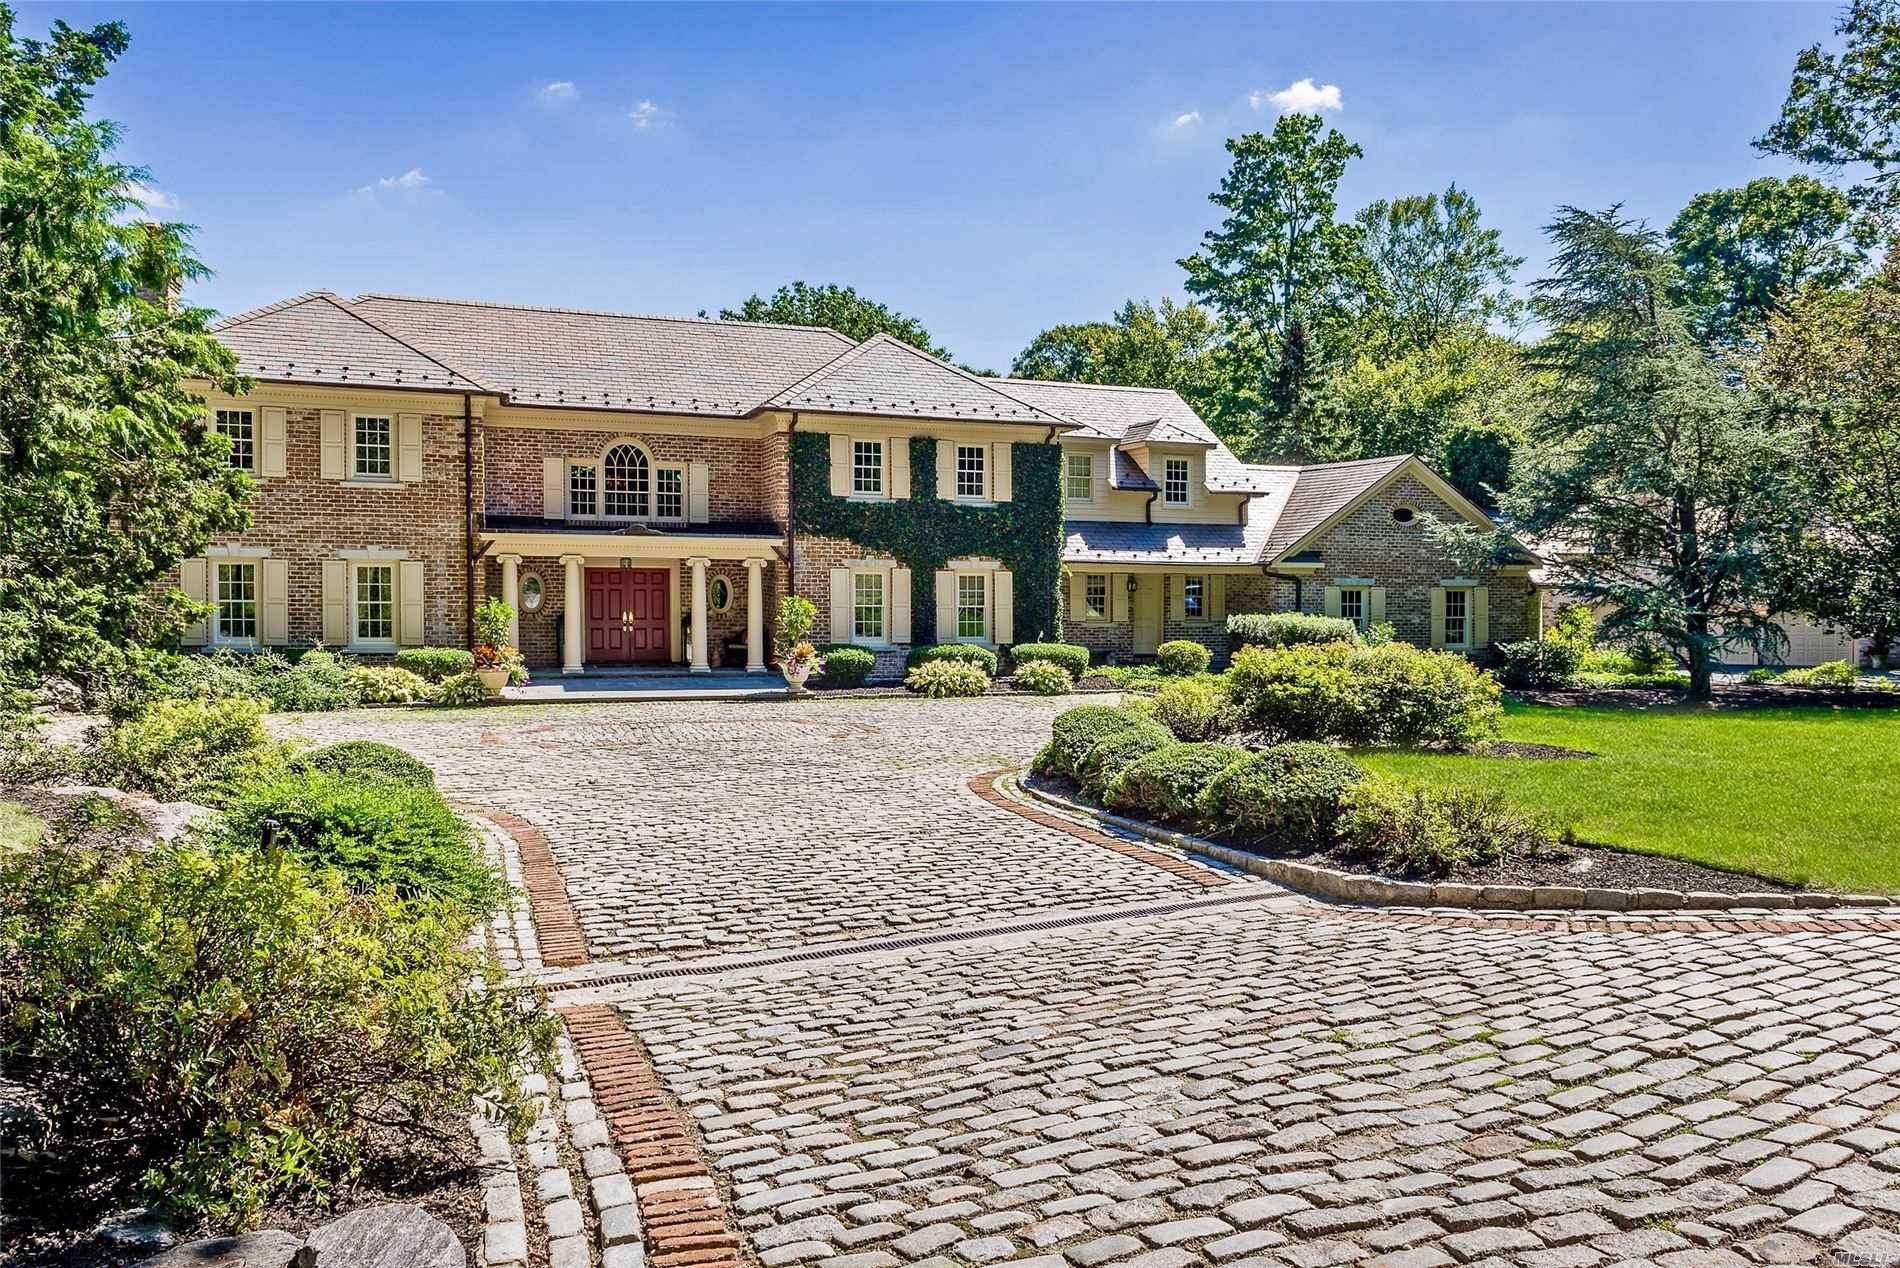 Gorgeous Manor home set on 5 lush acres in ultra private location near private clubs schools.